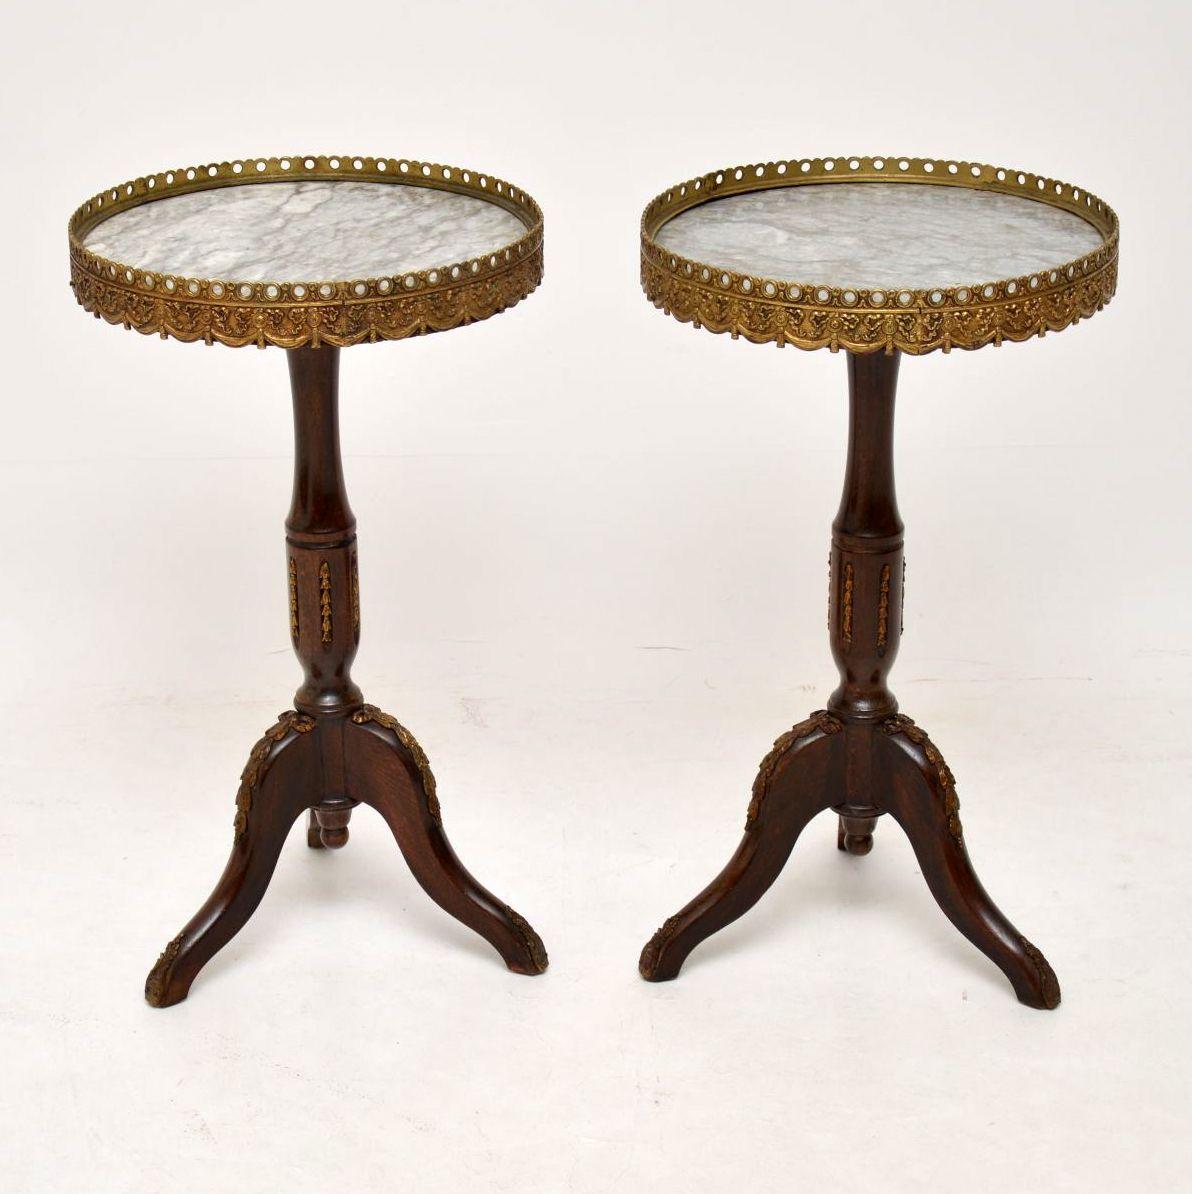 Pair of antique French style marble top wine tables in good original condition. They are mahogany with matching marble tops, surrounded by gilt metal galleries, sitting on turned mahogany bases with tripod legs. There are various gilt bronze mounts